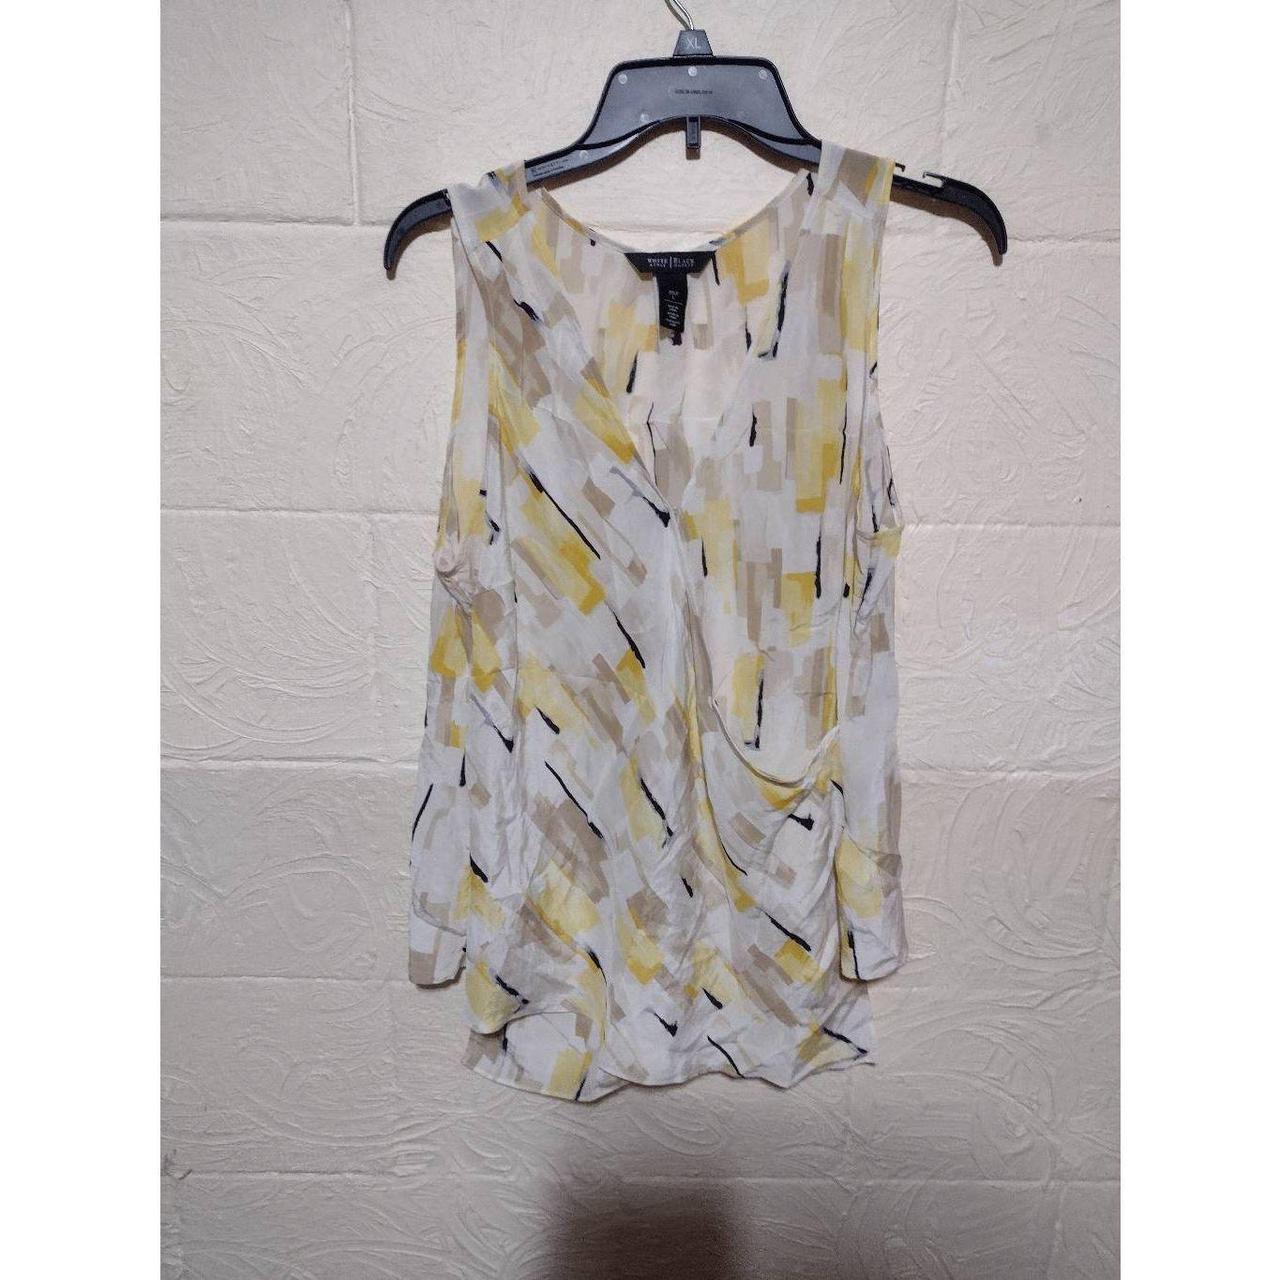 Black and White Floral Tank Top by White House Black Market Womens